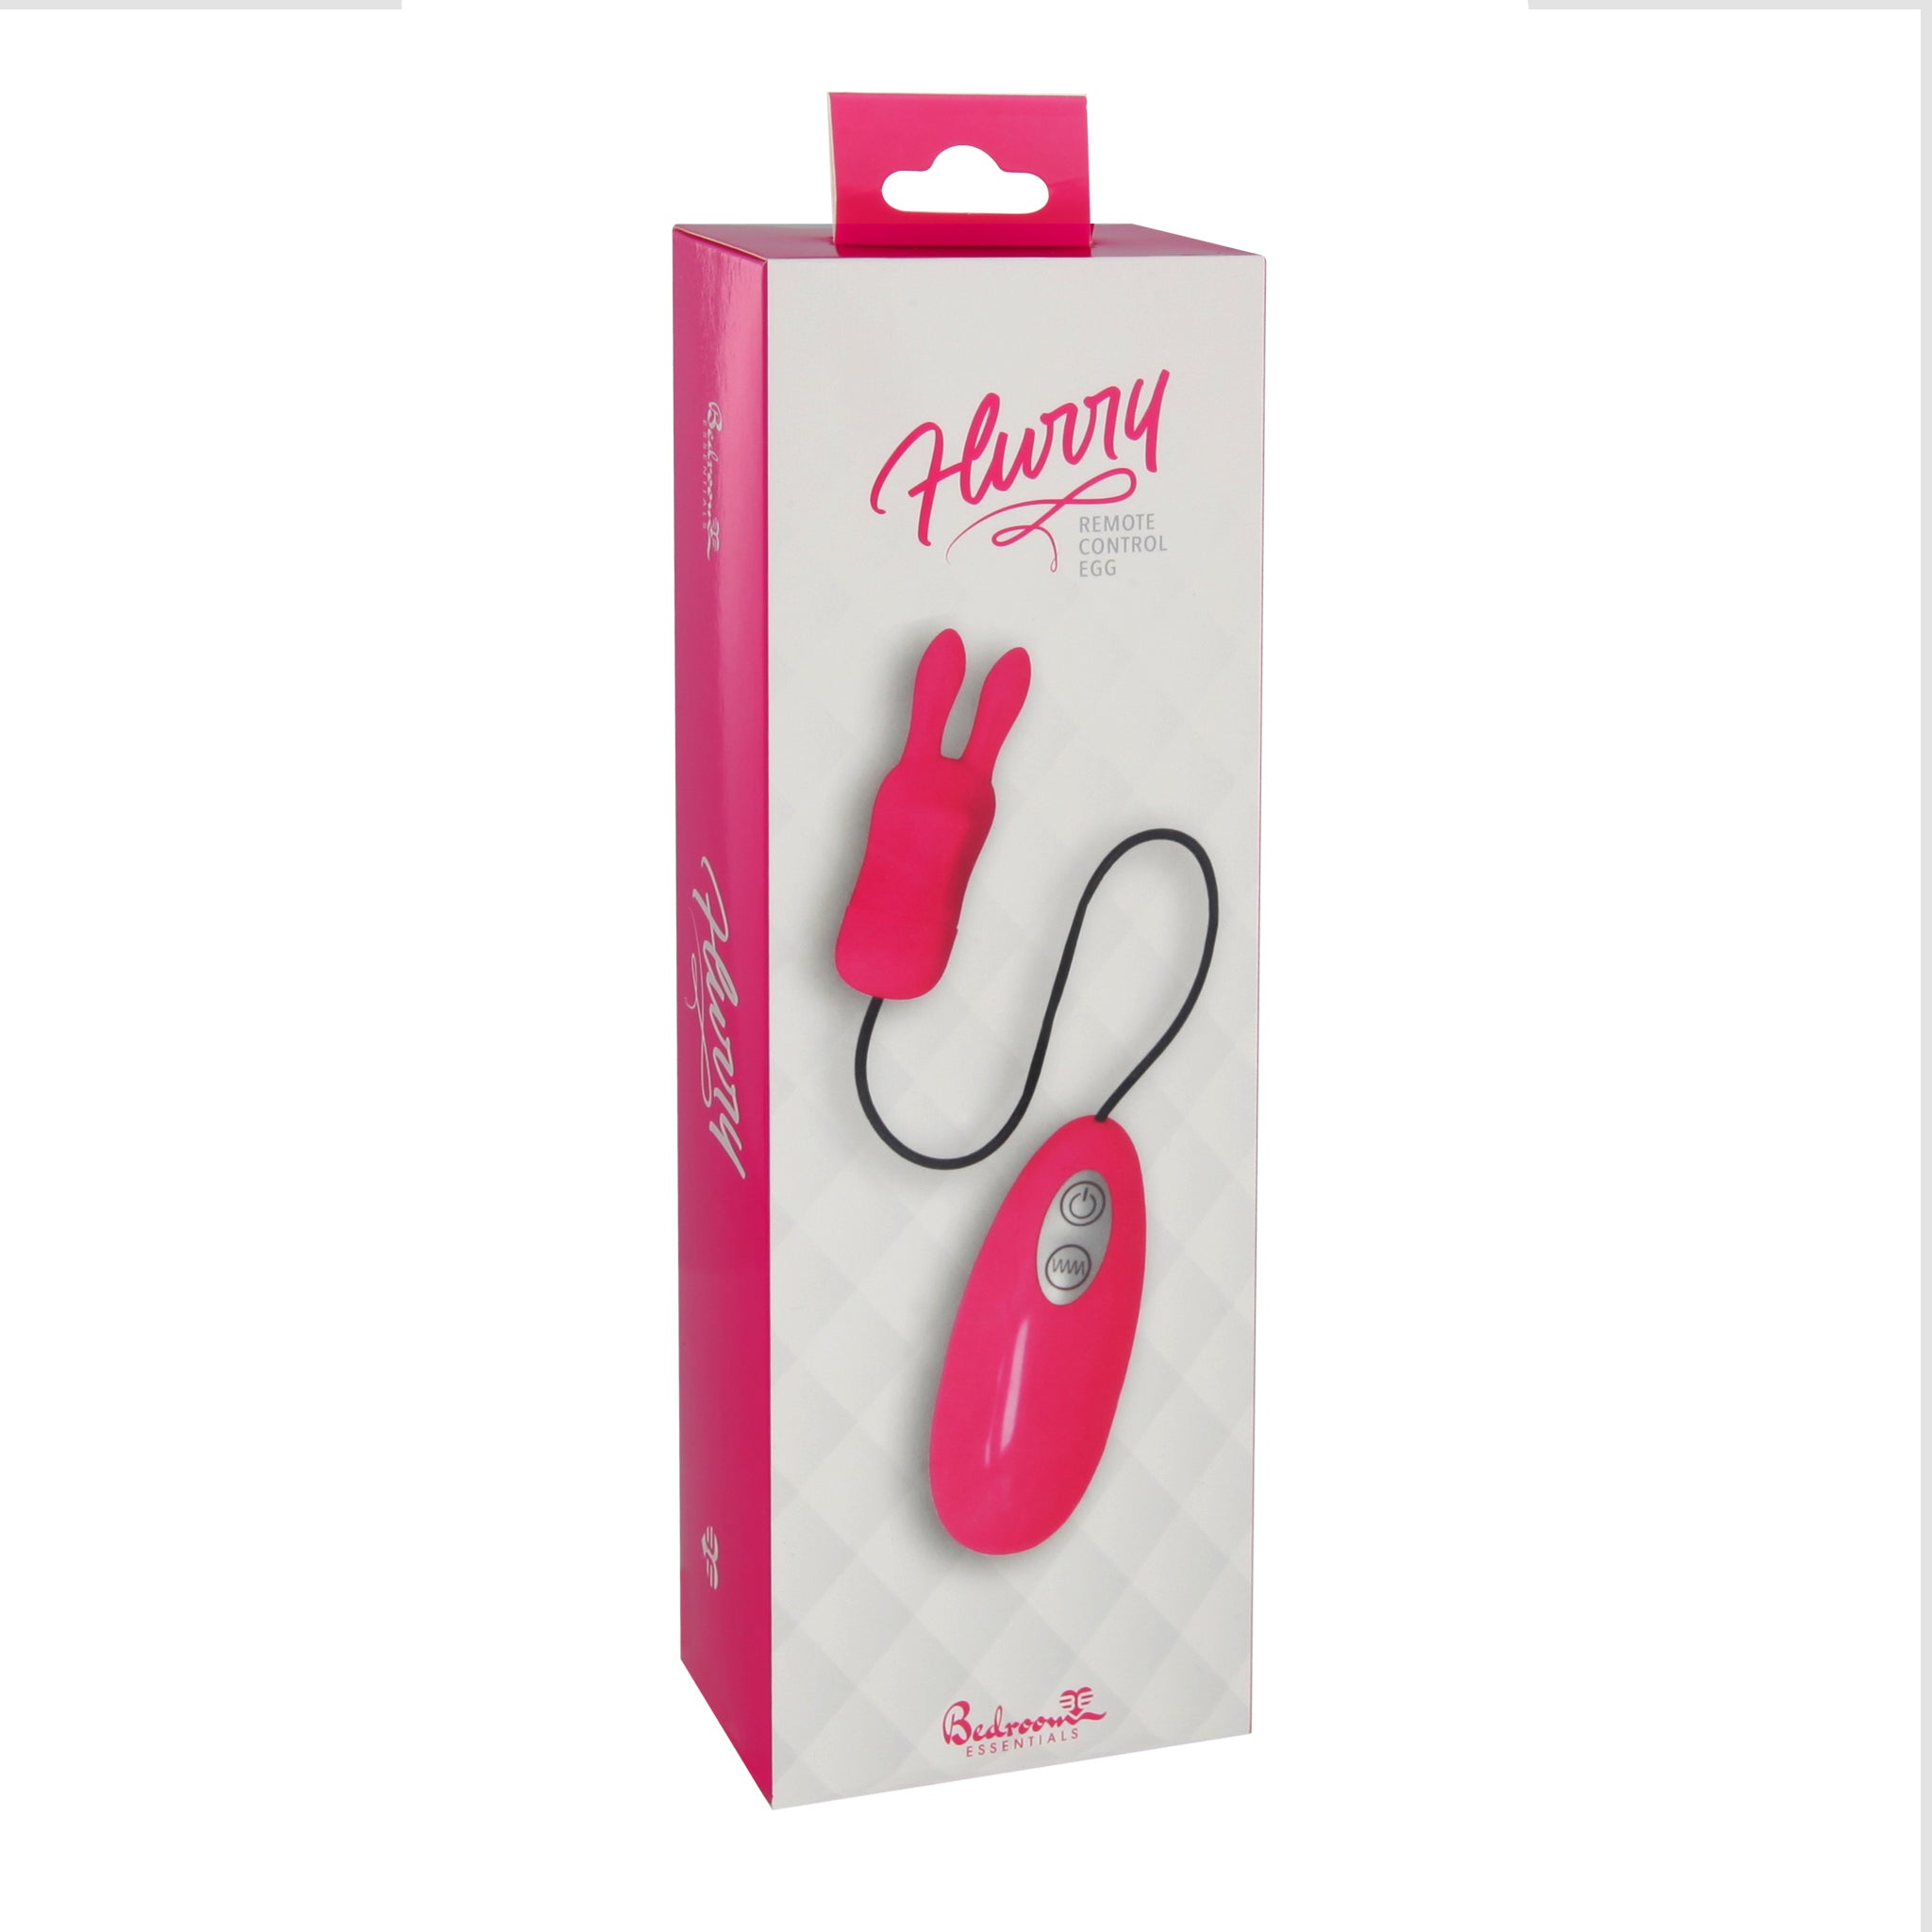 Flurry Bullet Vibrator with Wired Remote